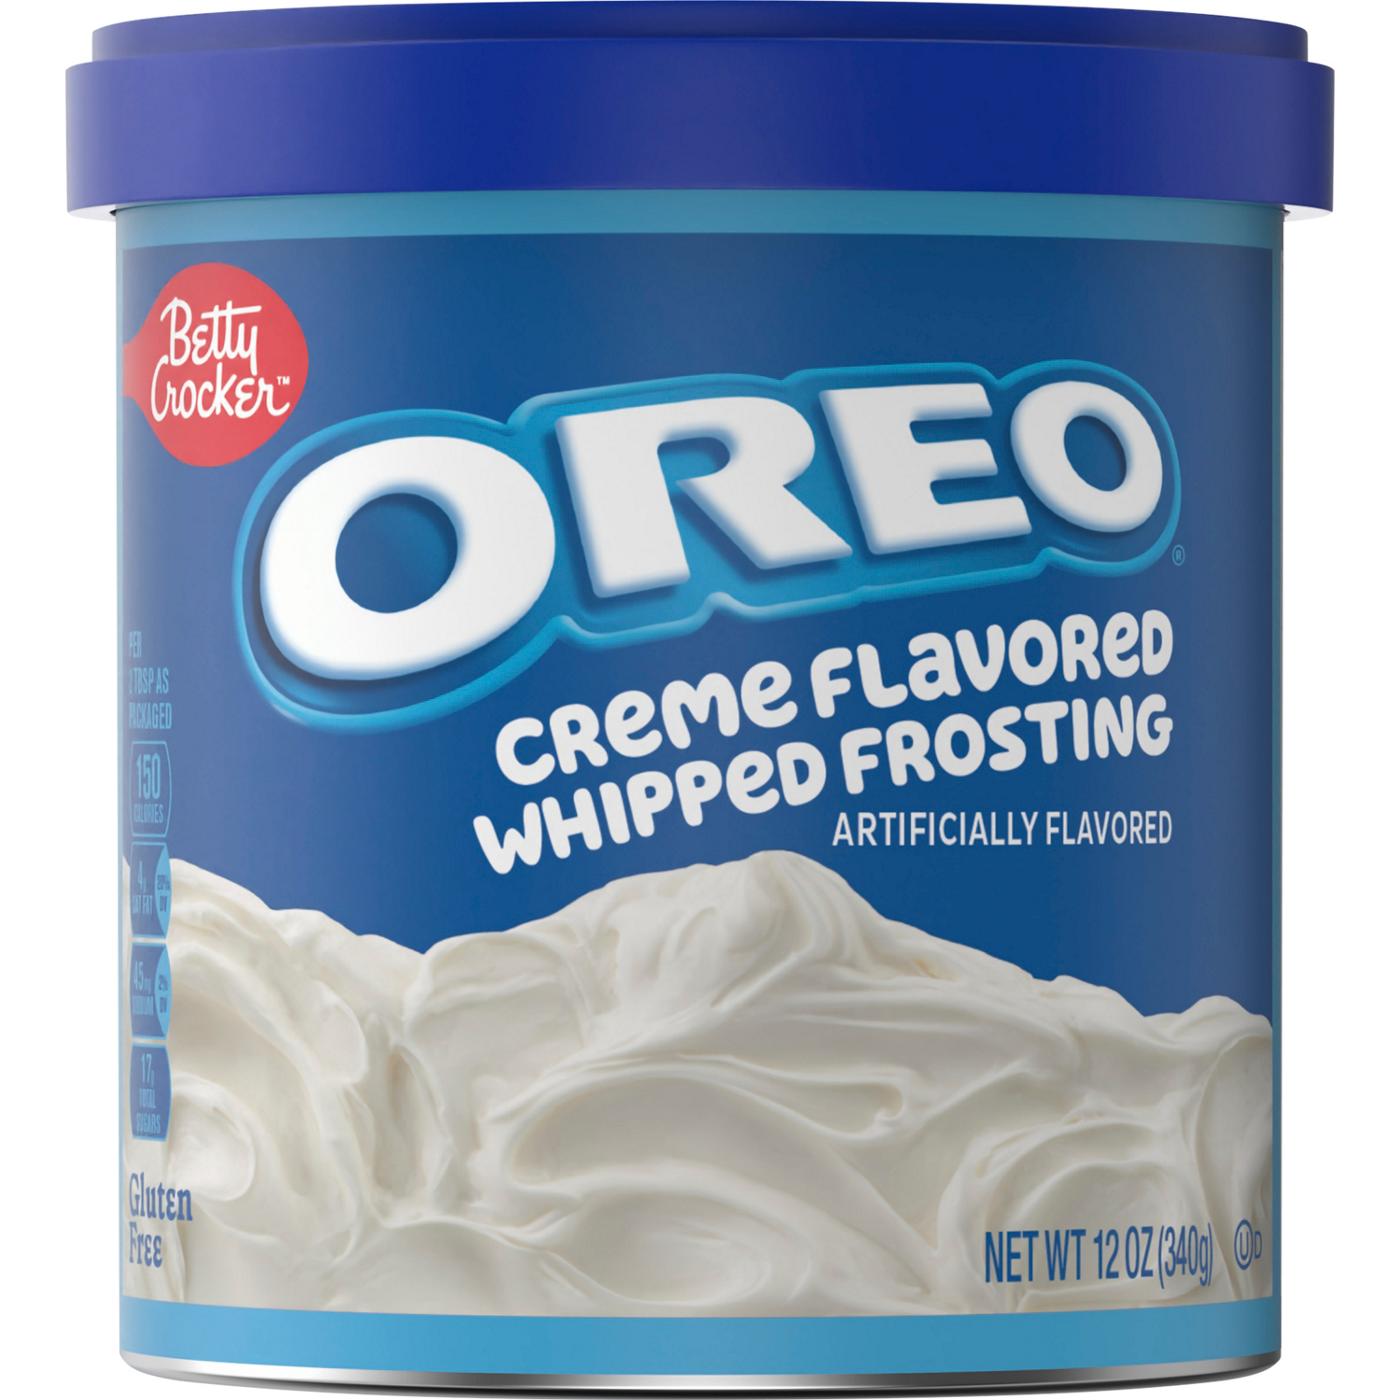 Betty Crocker Oreo Creme Flavored Whipped Frosting; image 1 of 4